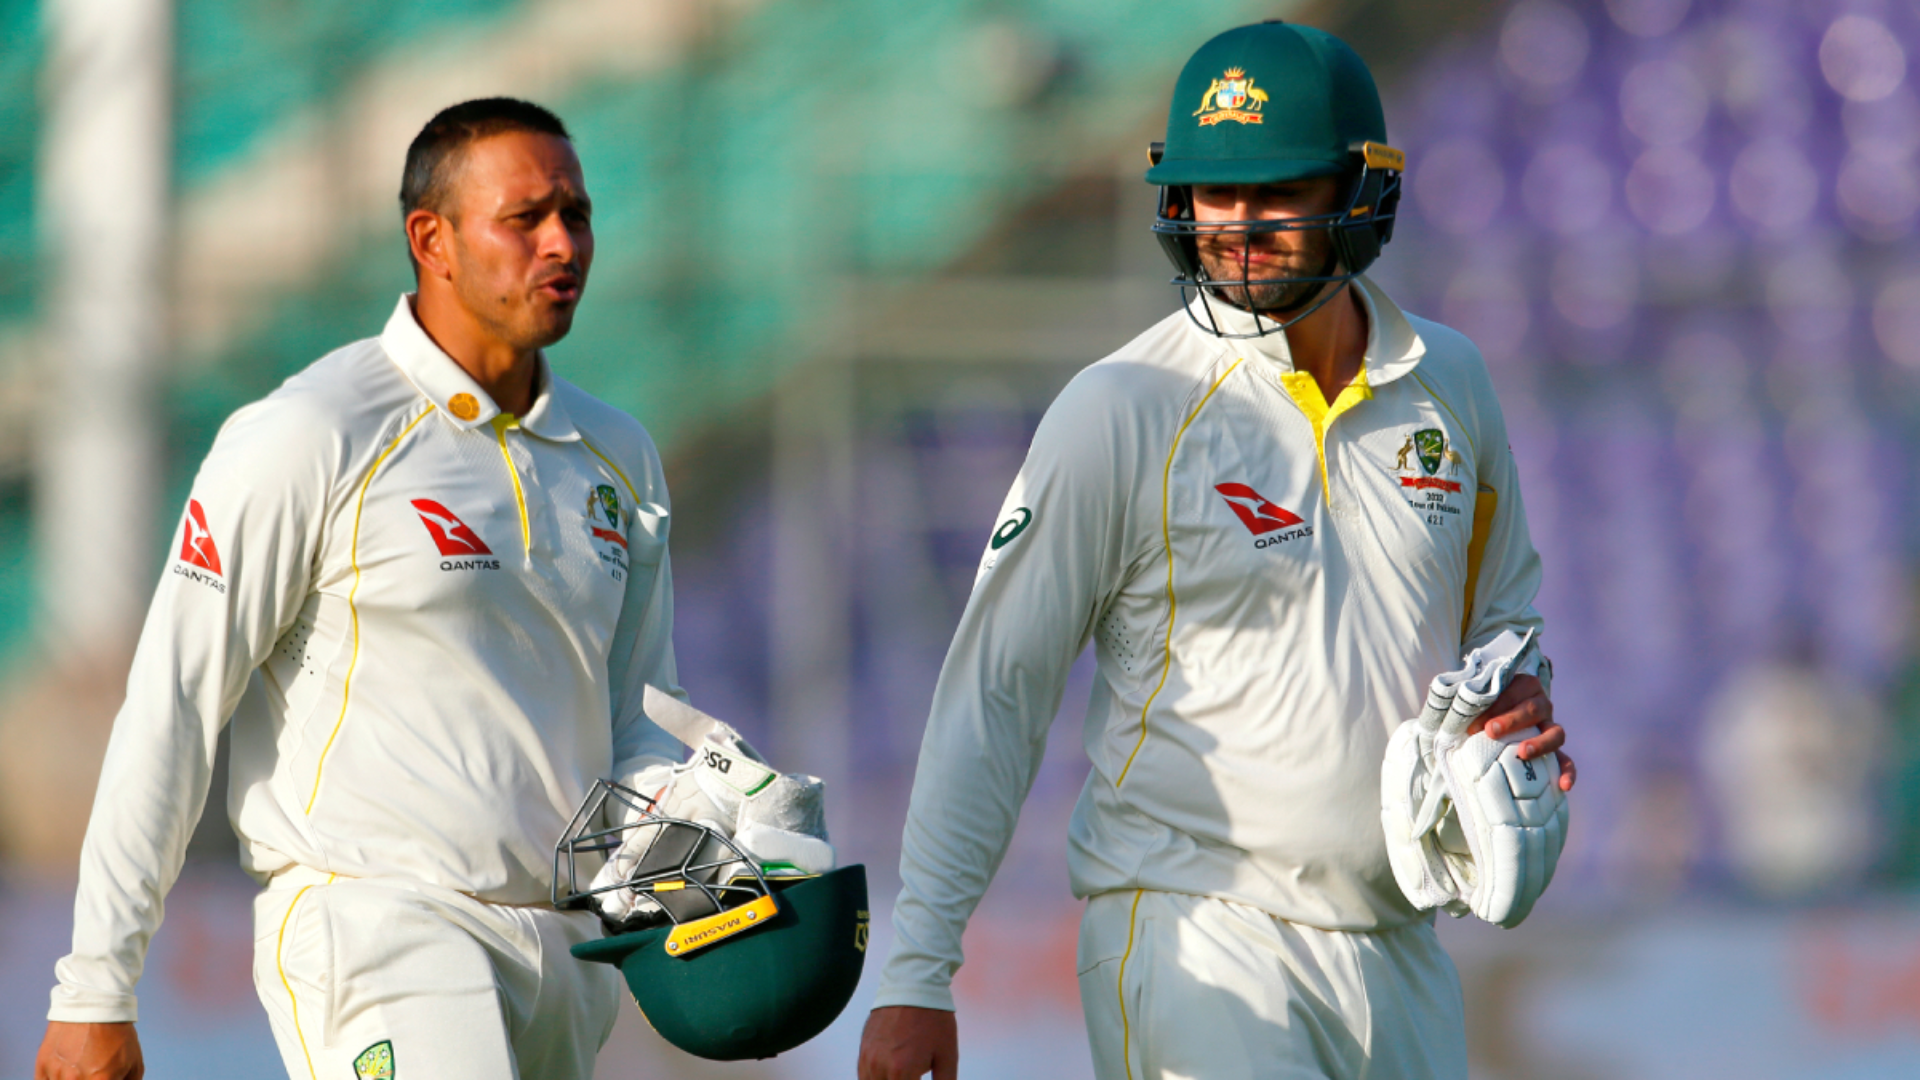 Australia’s second Test against Pakistan gets off to a good start thanks to Khawaja and Warner (Tea, Day 1)